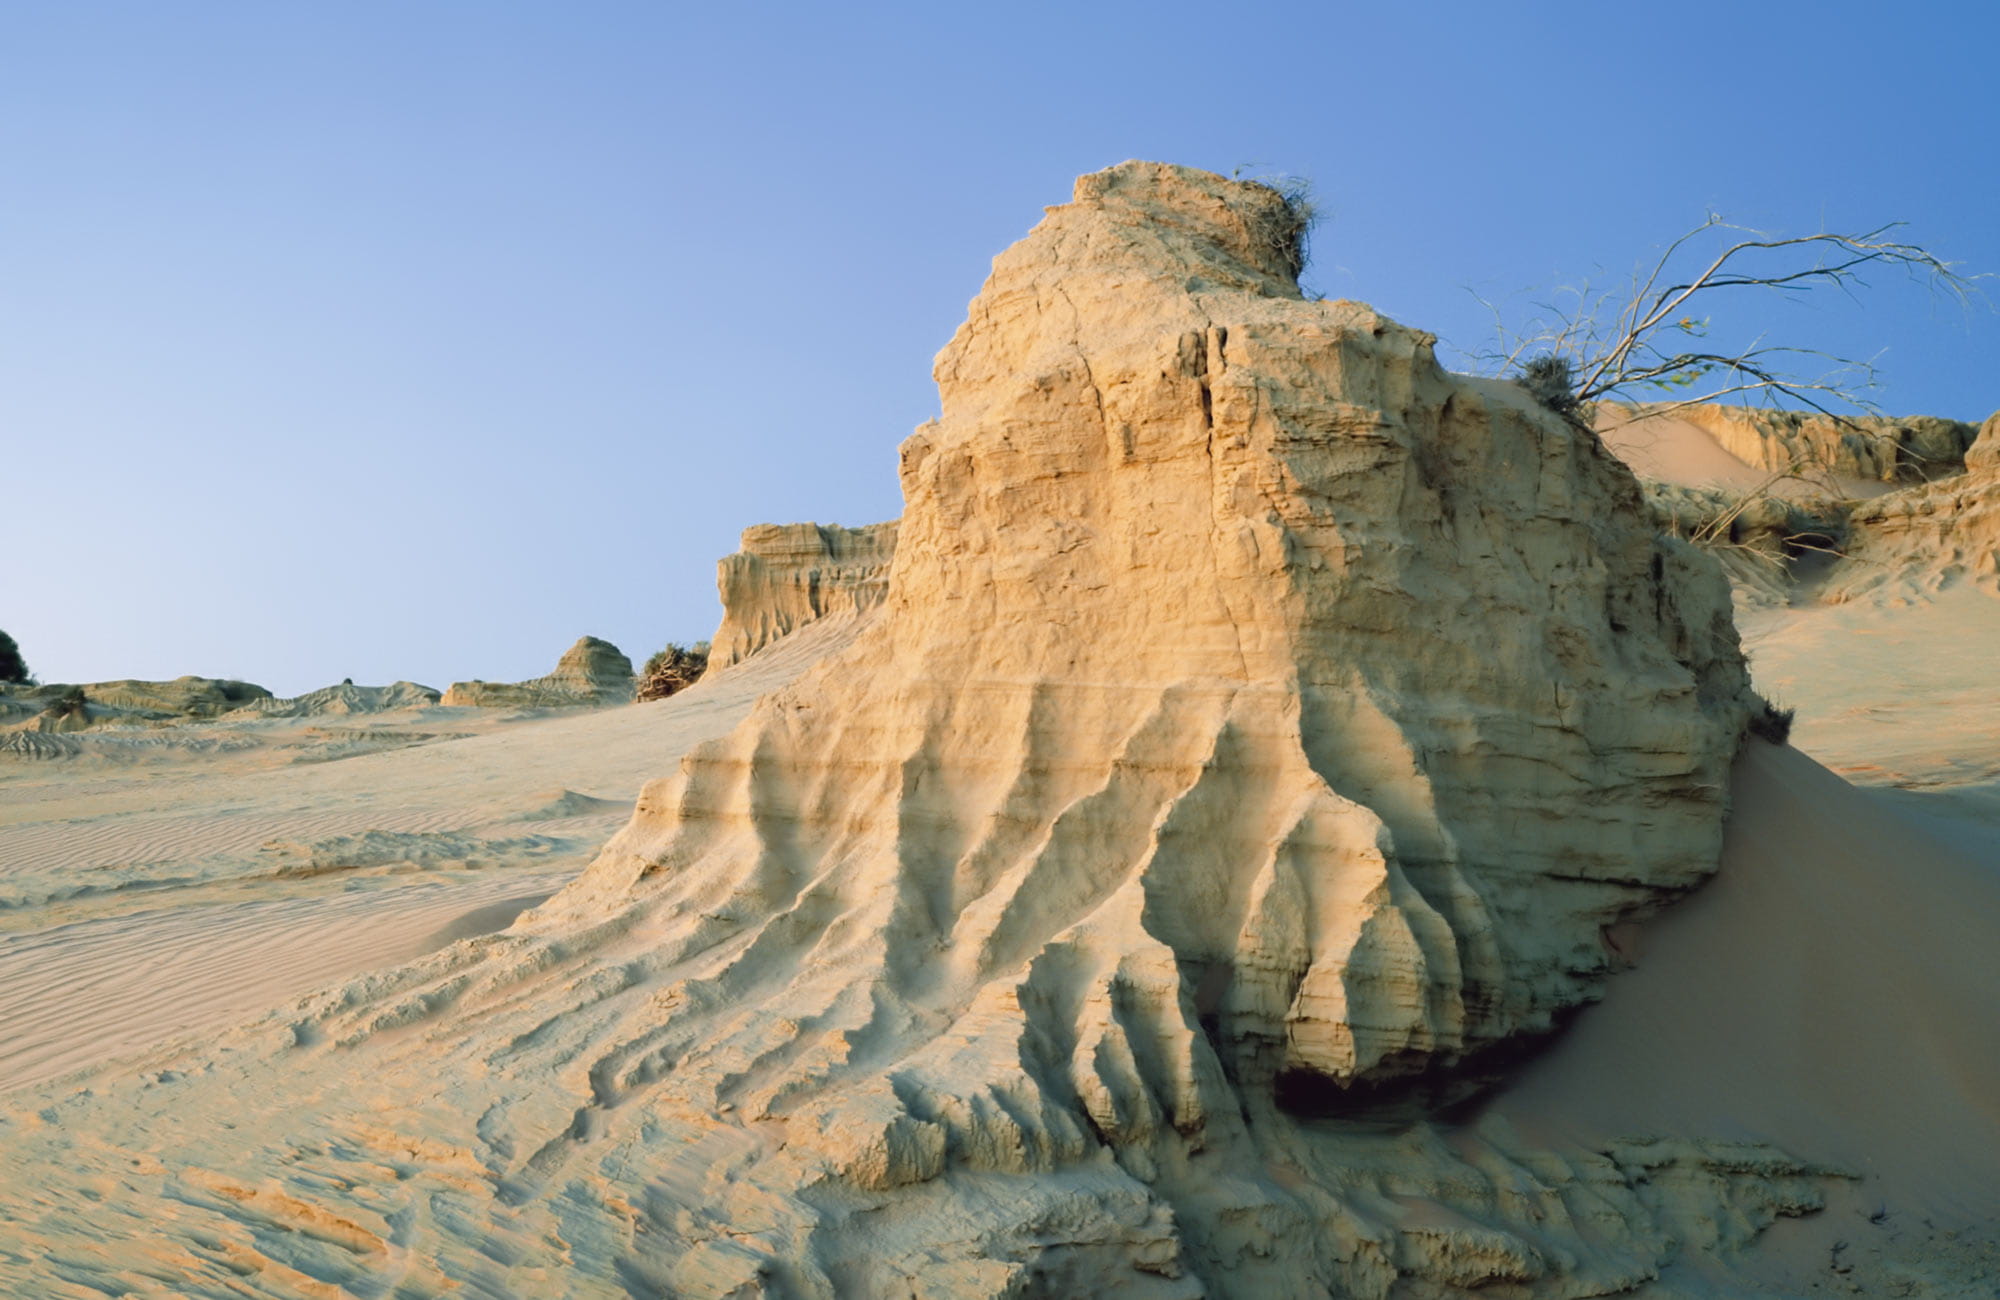 Sand formation, Walls of China, Mungo National Park. Photo:OEH